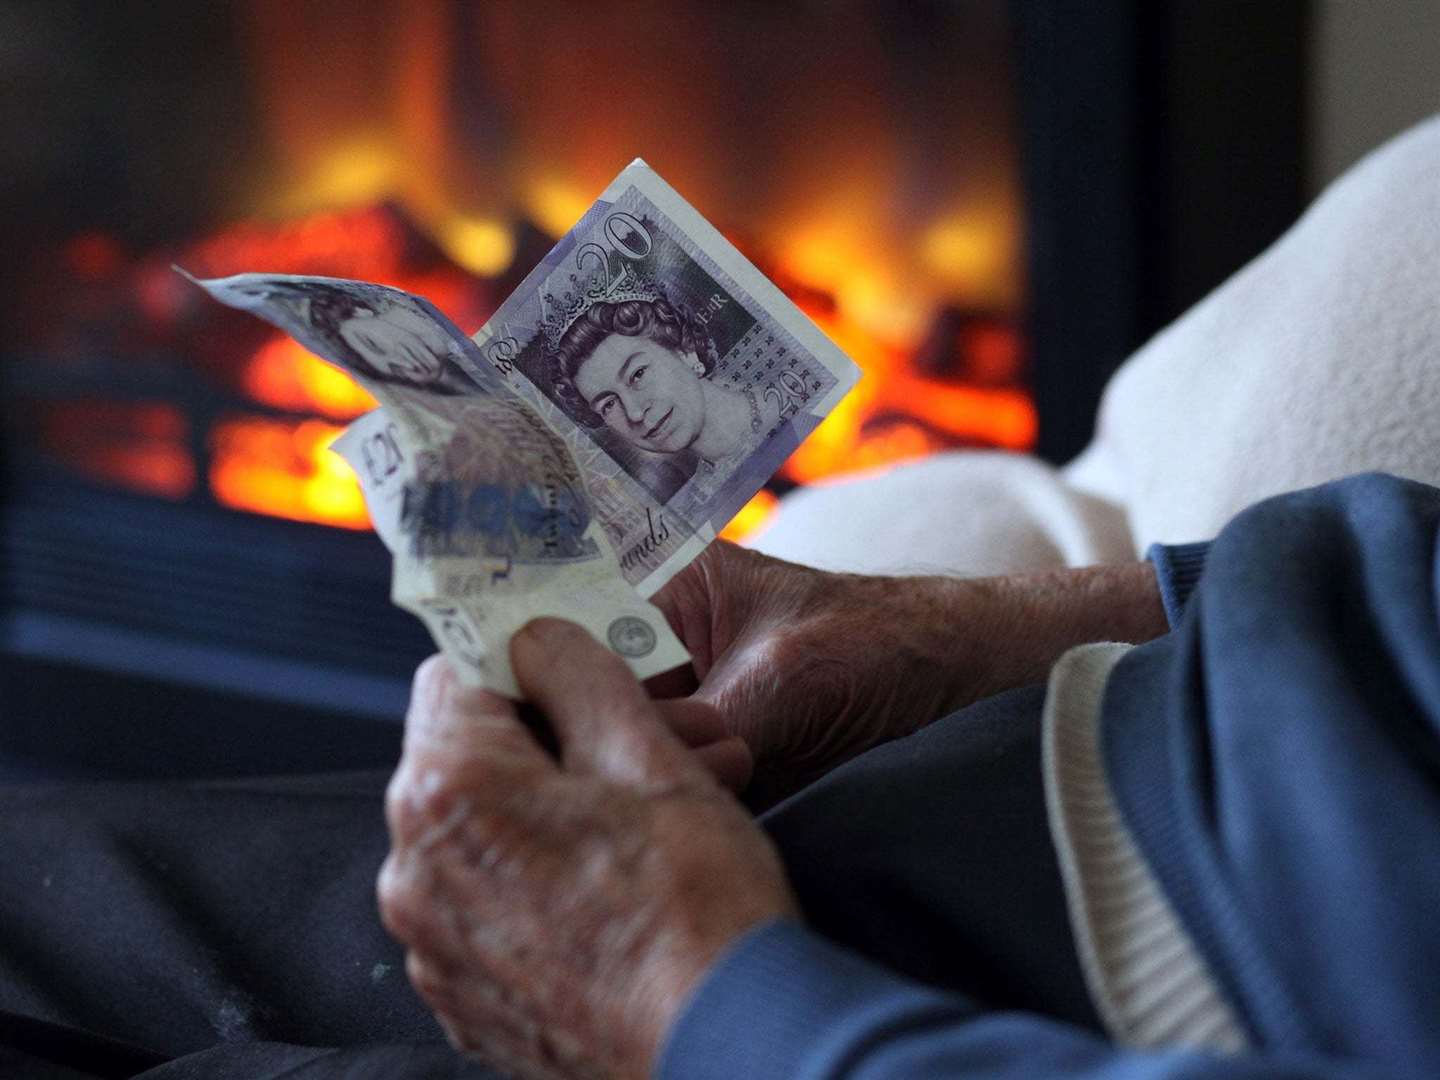 Average energy bills are set rise to about £2000.